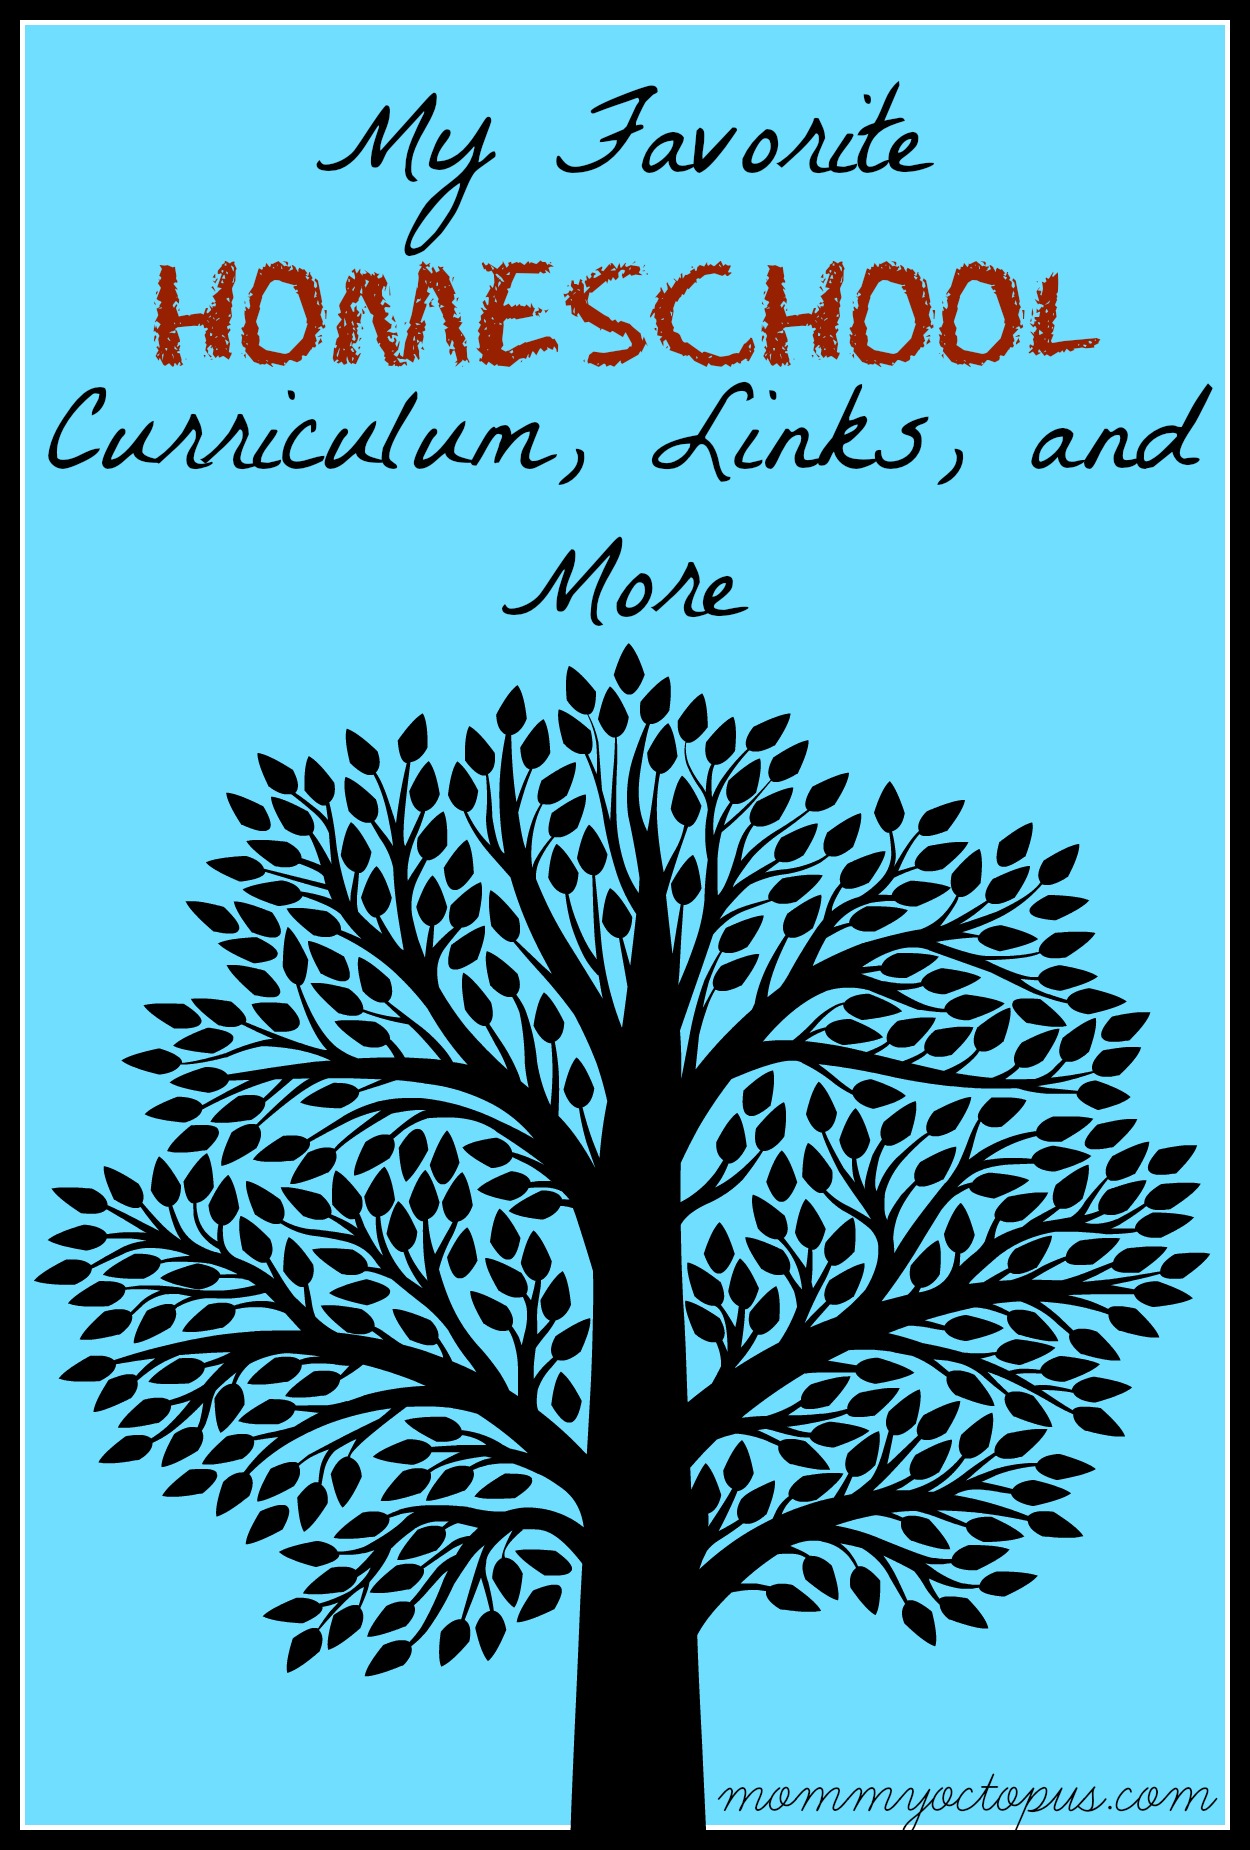 My Favorite Homeschool Curriculum, Links, and More